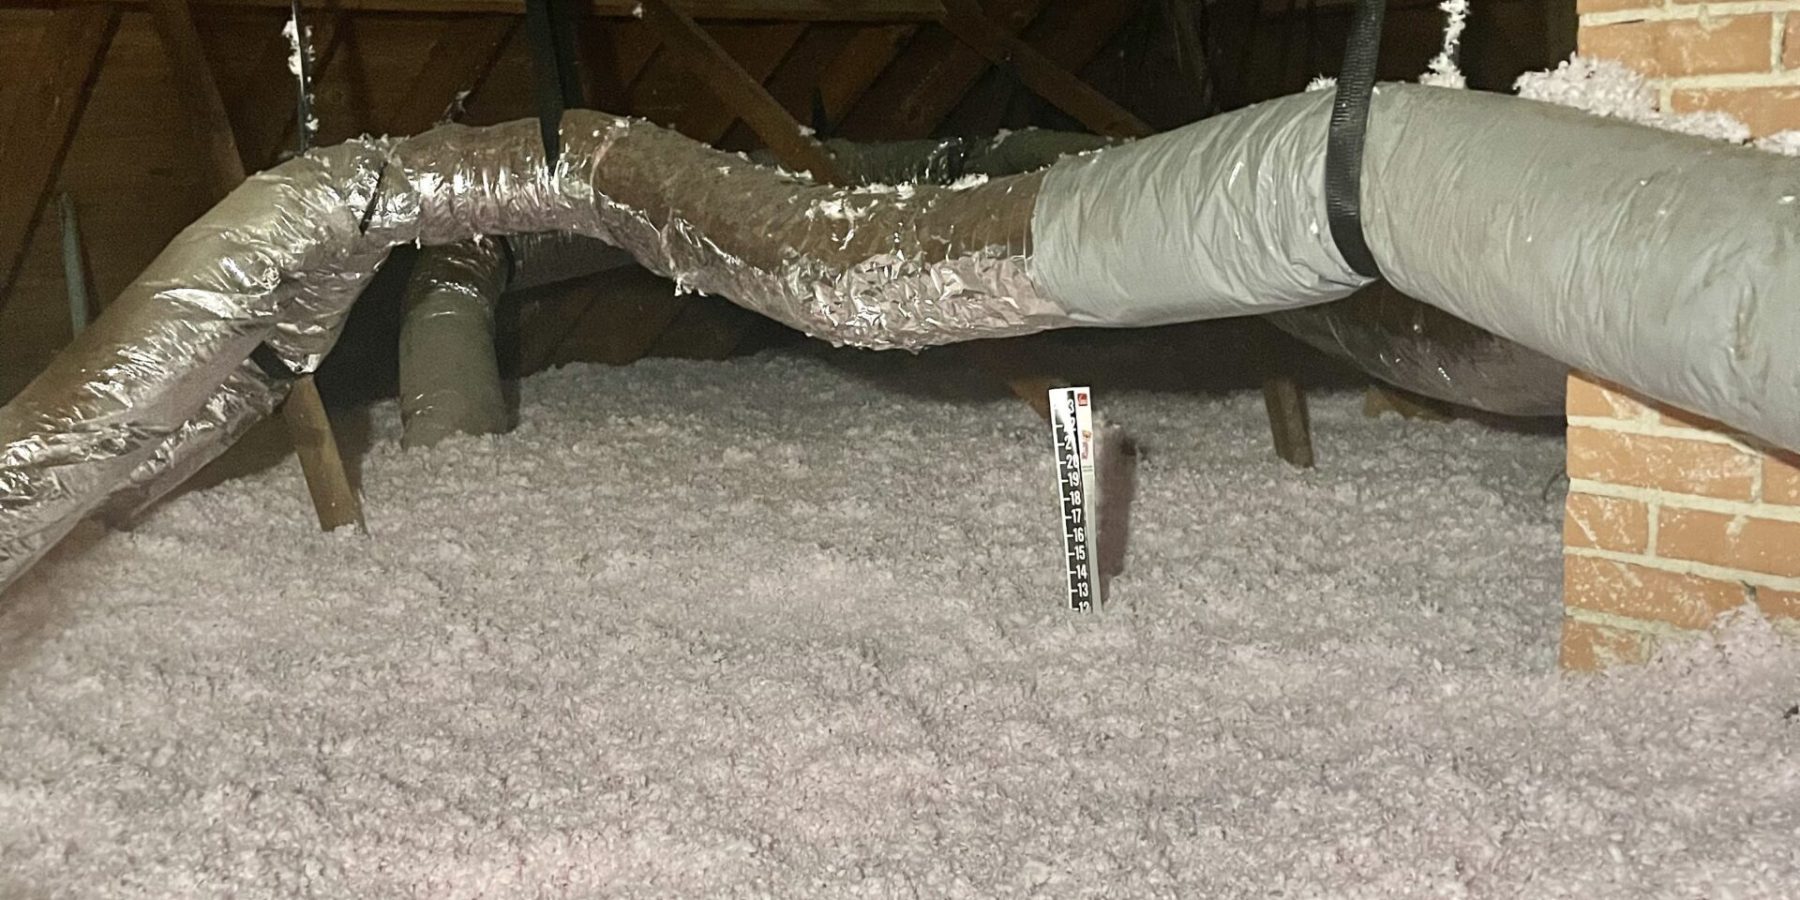 Best Attic Insulation by Elite Insulation Specialist - 1712 Almond Dr, Mansfield, TX 76063, United States 18177930629   http://www.eliteinsulationspecialist.com/   https://www.google.com/maps?cid=1454976148324948402